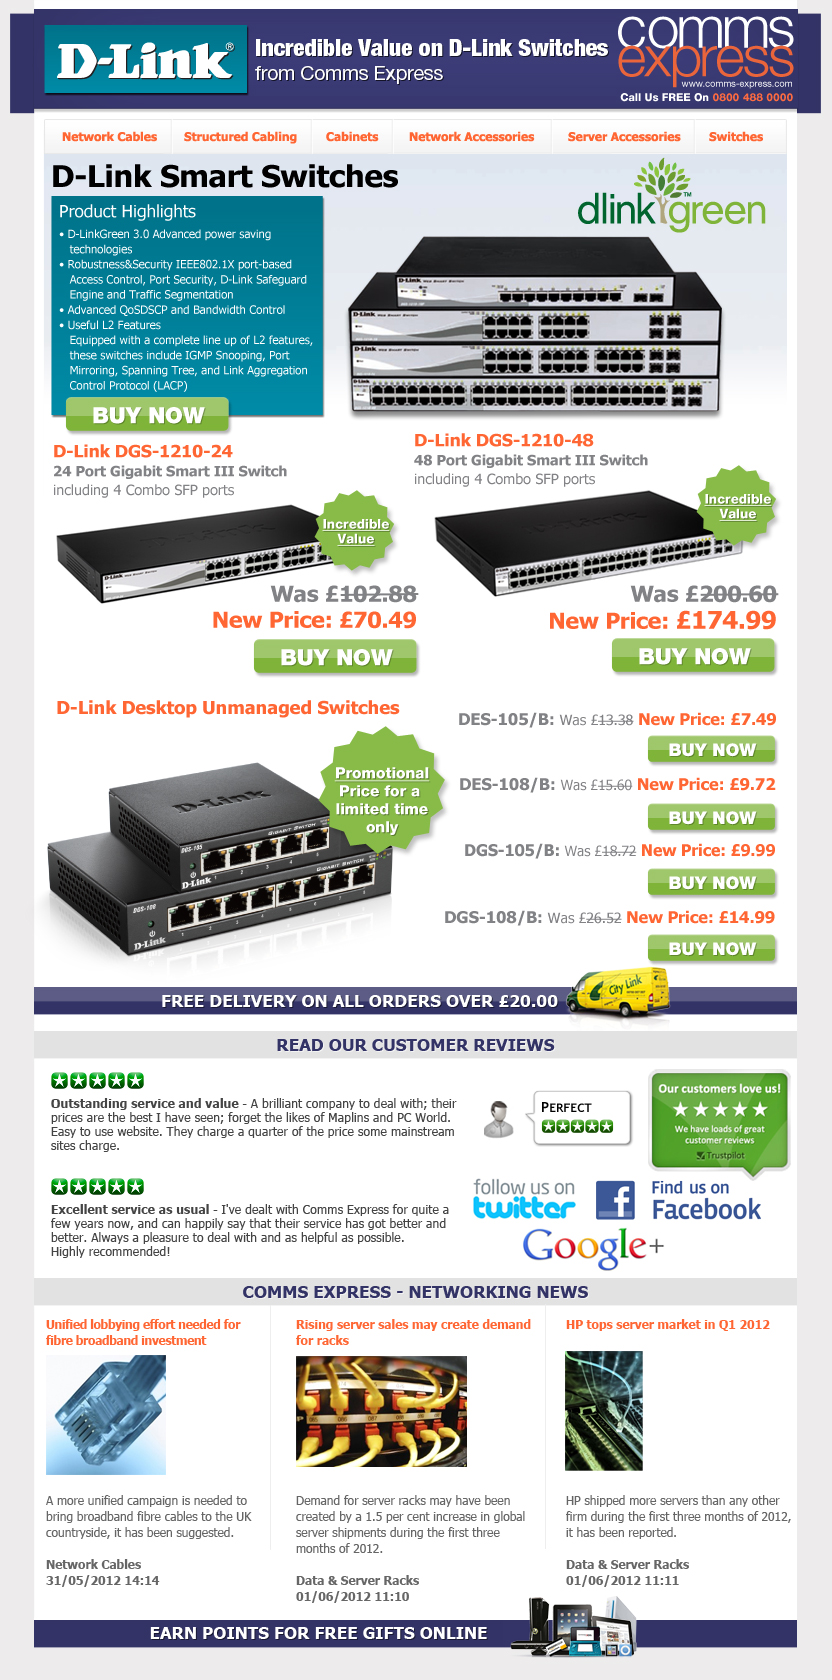 Incredible Value on D-Link Switches from Comms Express